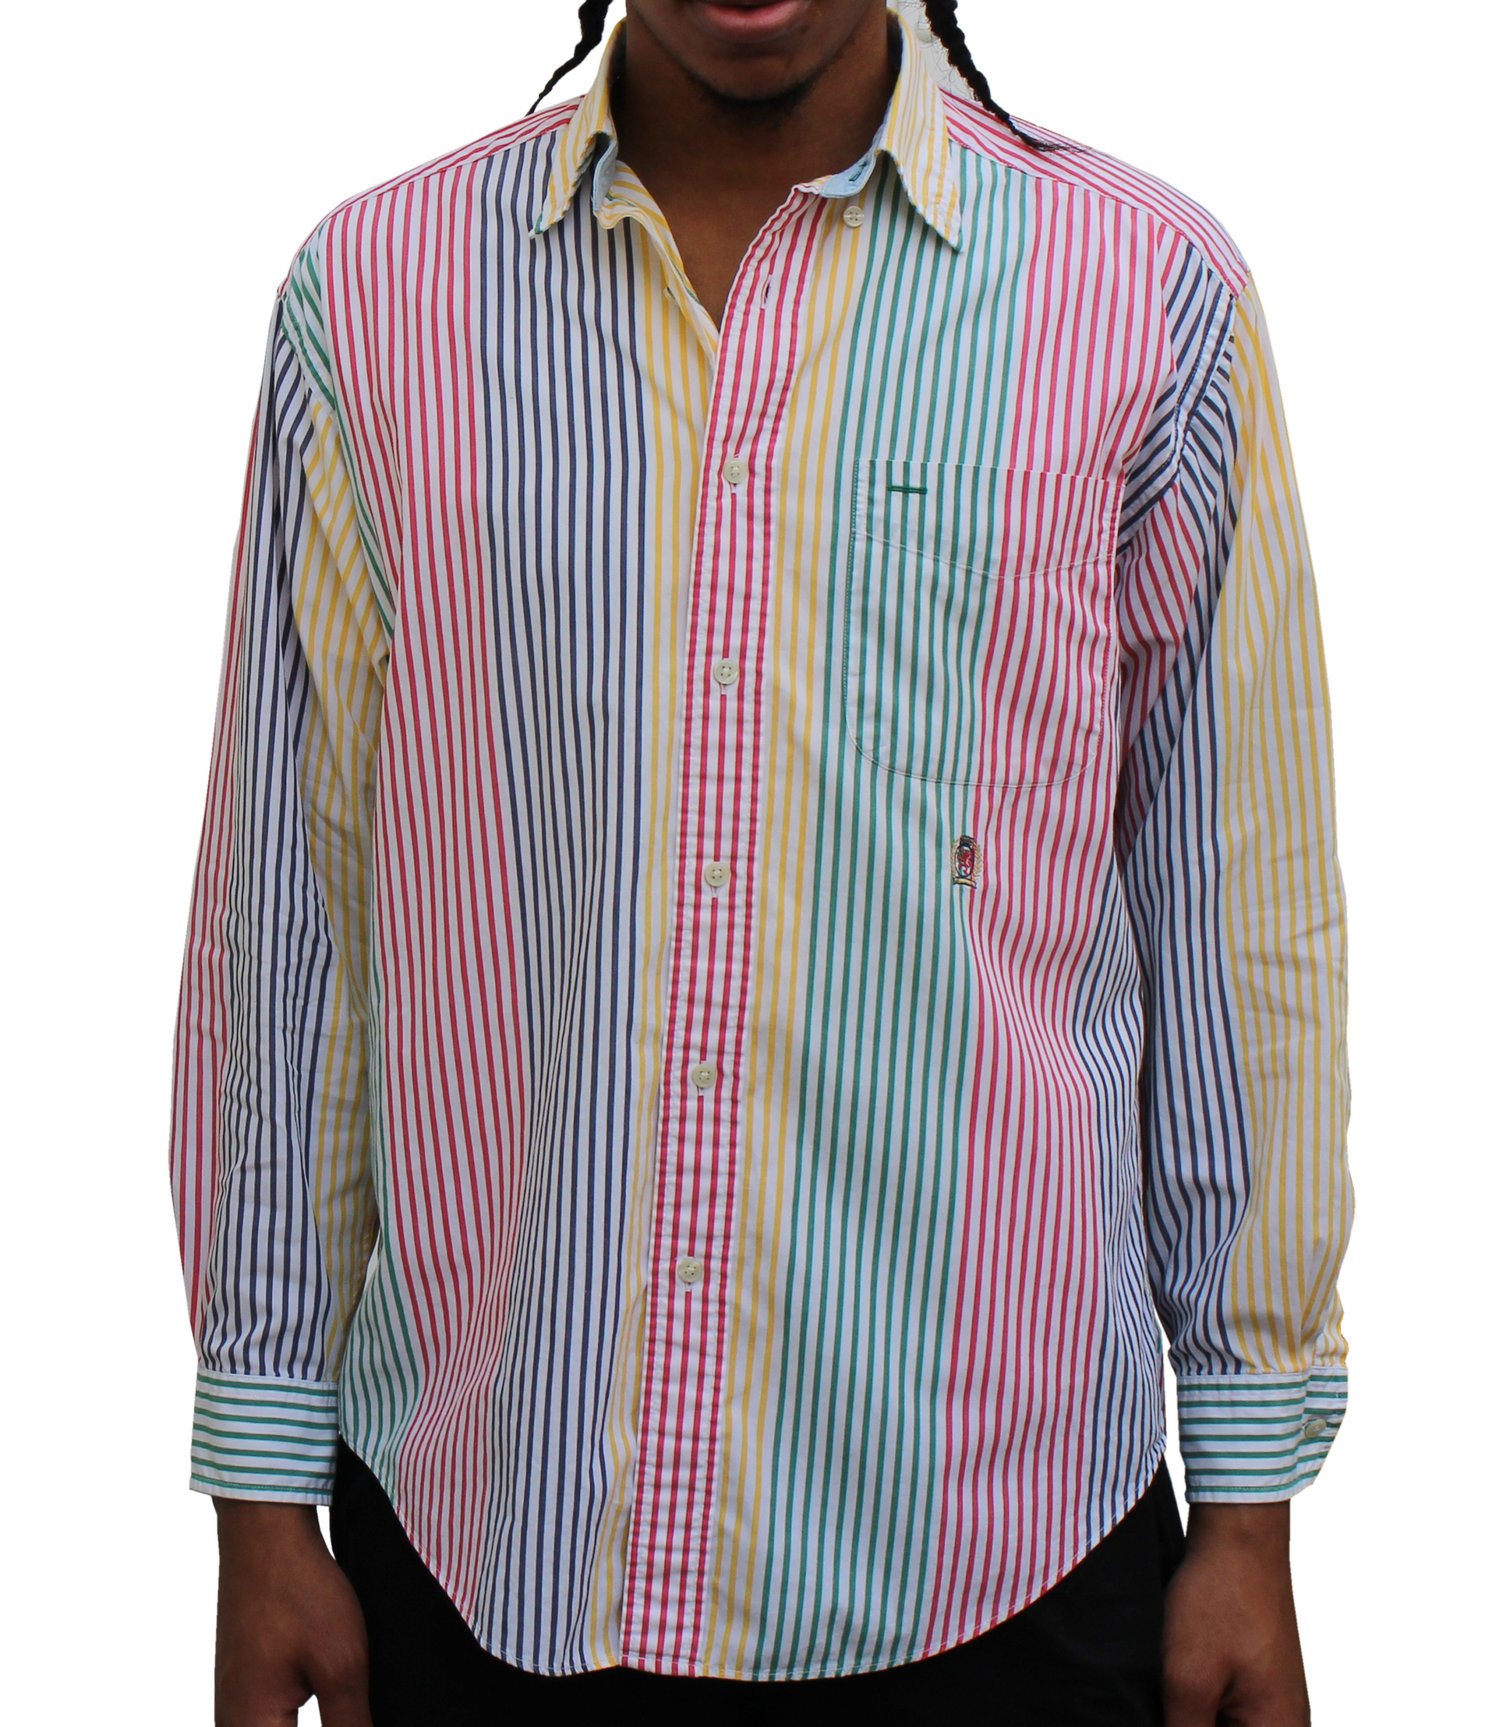 NWT MENS TOMMY HILFIGER  MULTICOLOR STRIPED LONG SLEEVE BUTTON UP SHIRT S L M 